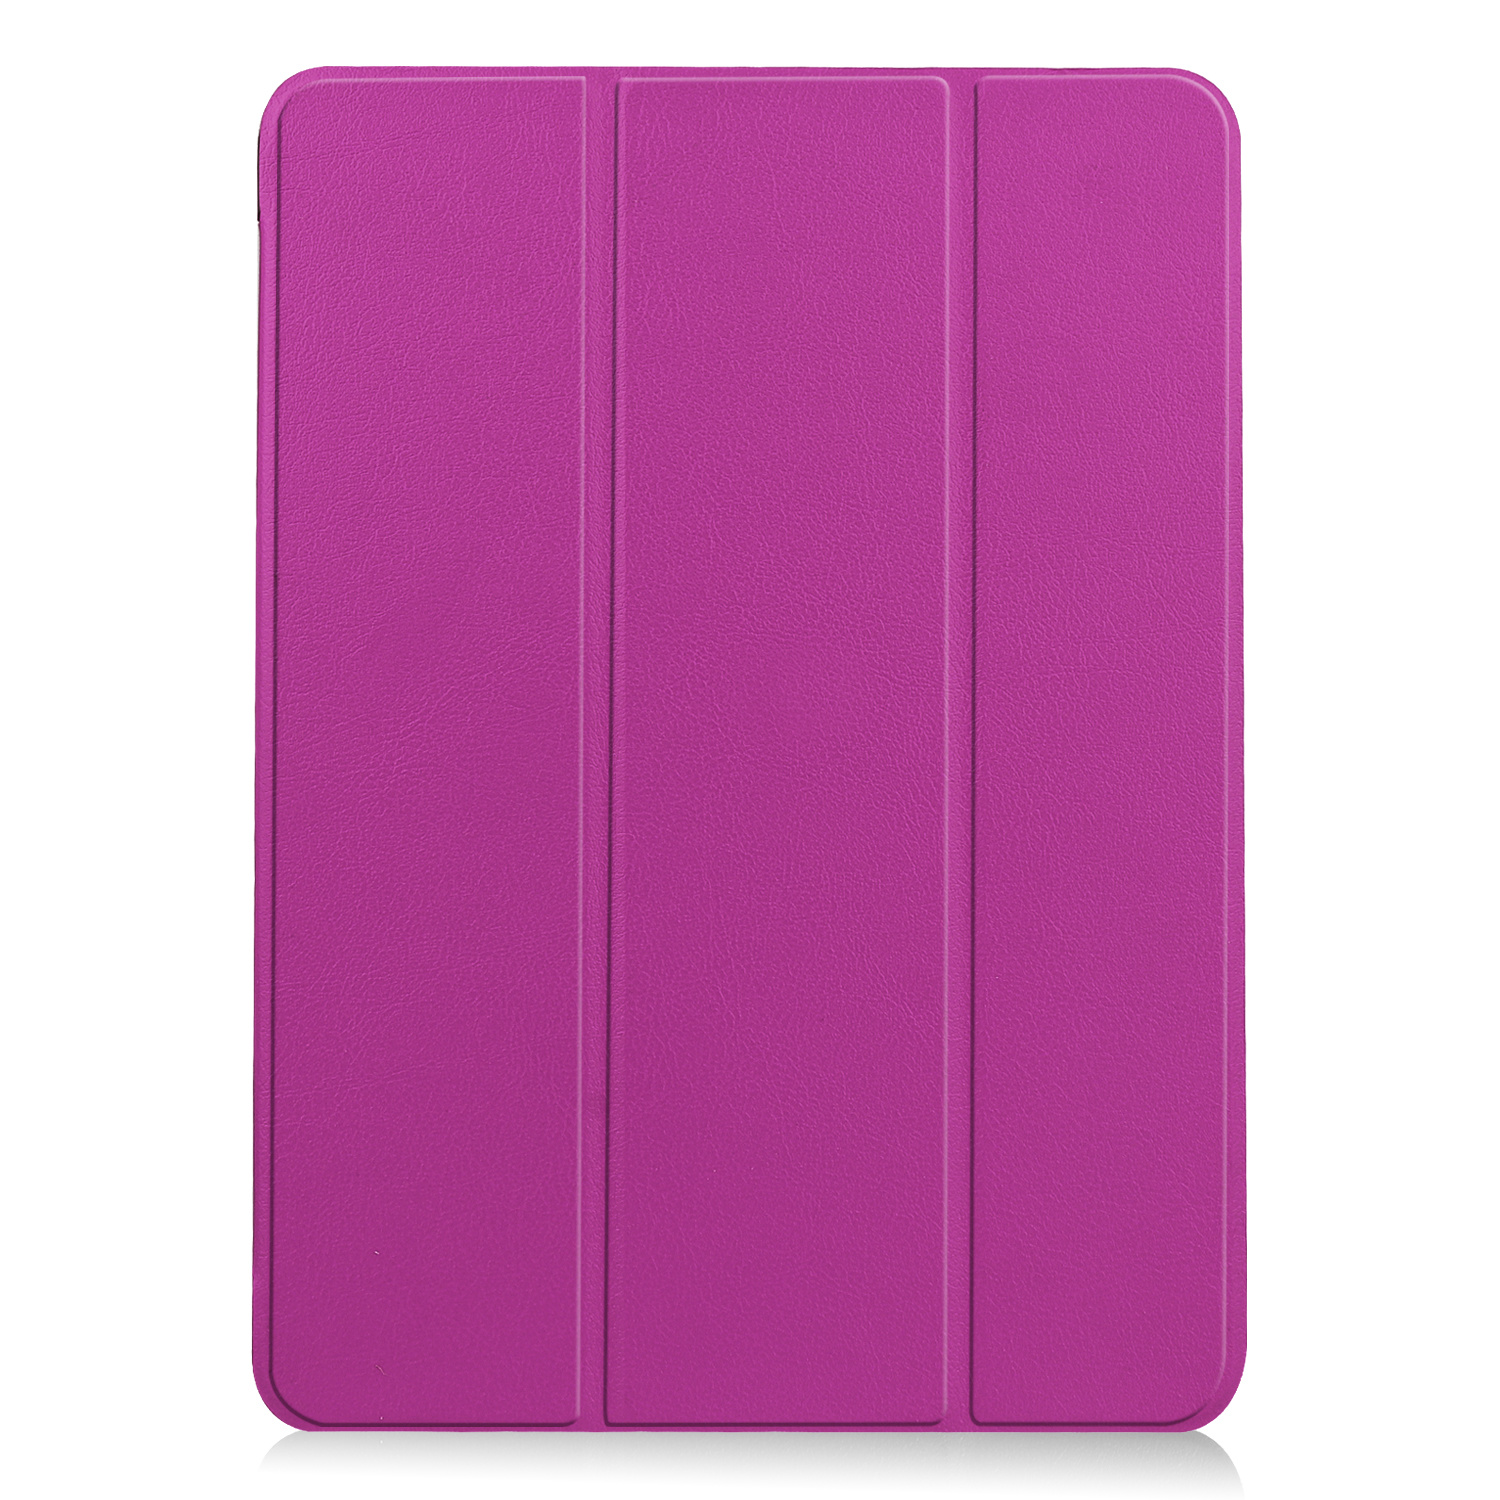 BASEY. iPad Air 5 2022 Hoes Case Hoesje Paars Uitsparing Apple Pencil iPad Air 2022 10.9 Inch